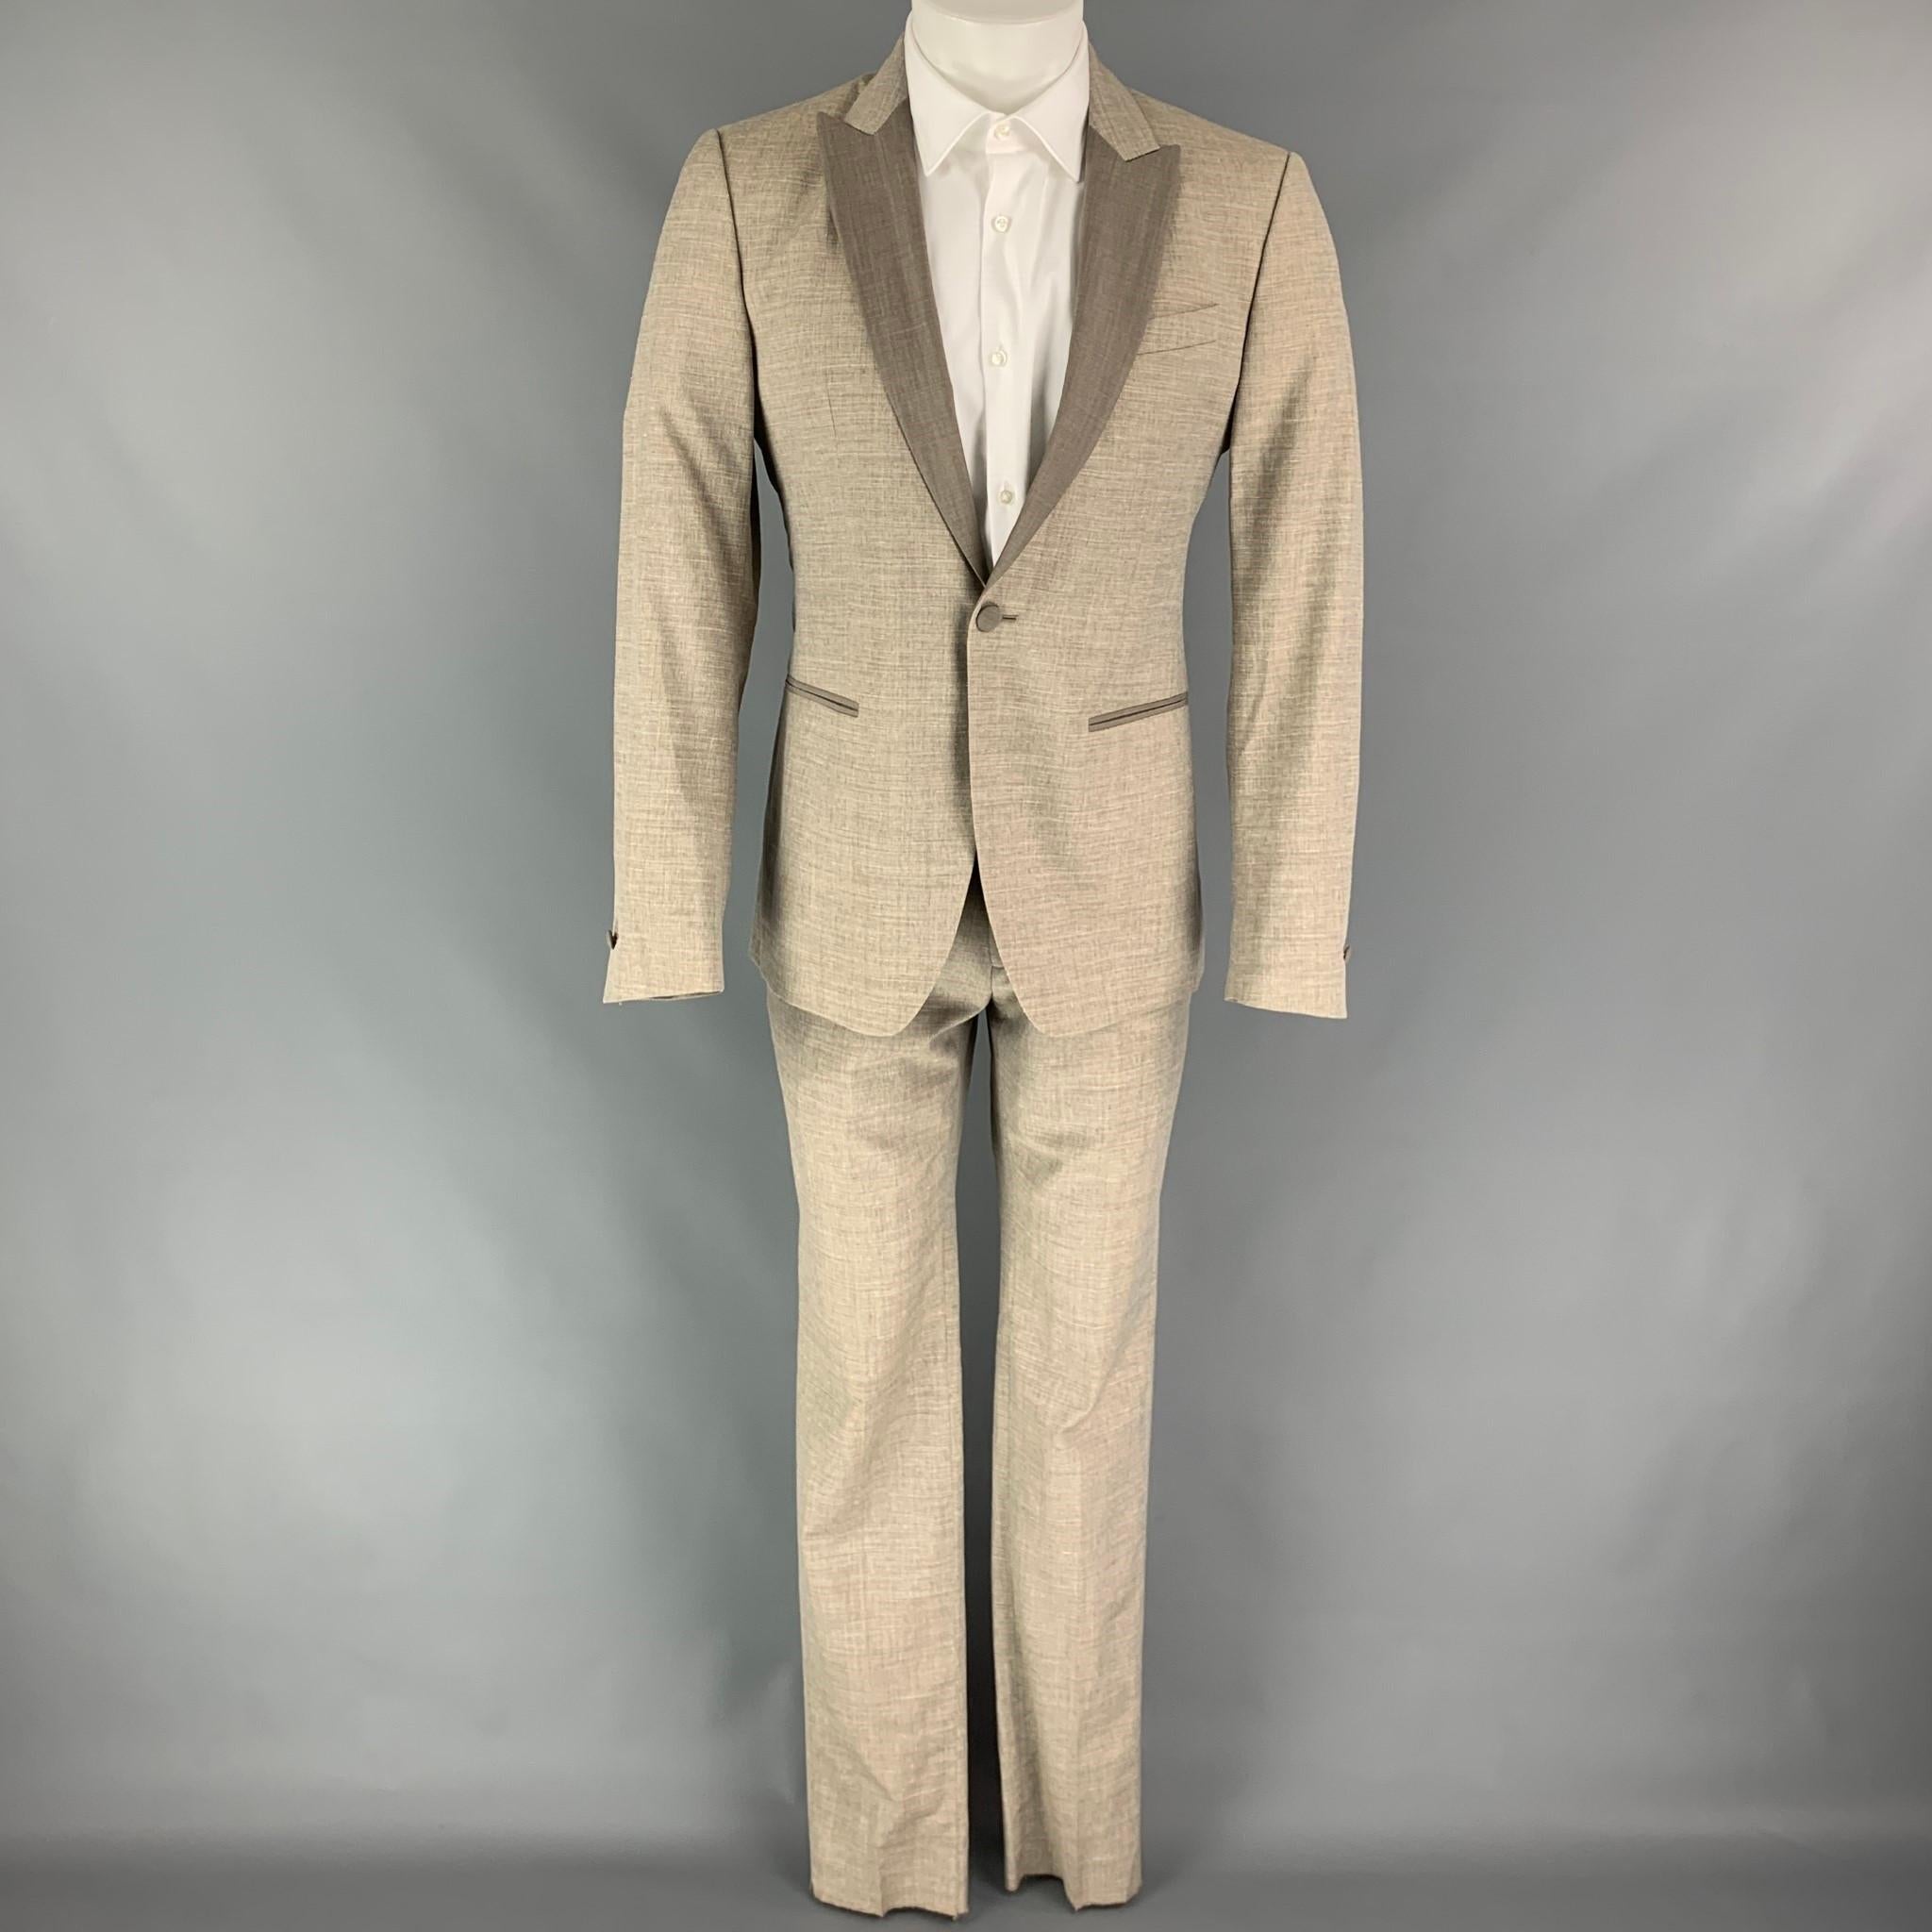 JOHN VARVATOS suit comes in a oatmeal heather wool with a full liner and includes a single breasted, single button sport coat with peak lapel and matching flat front trousers. Made in Italy.

New With Tags.
Marked: